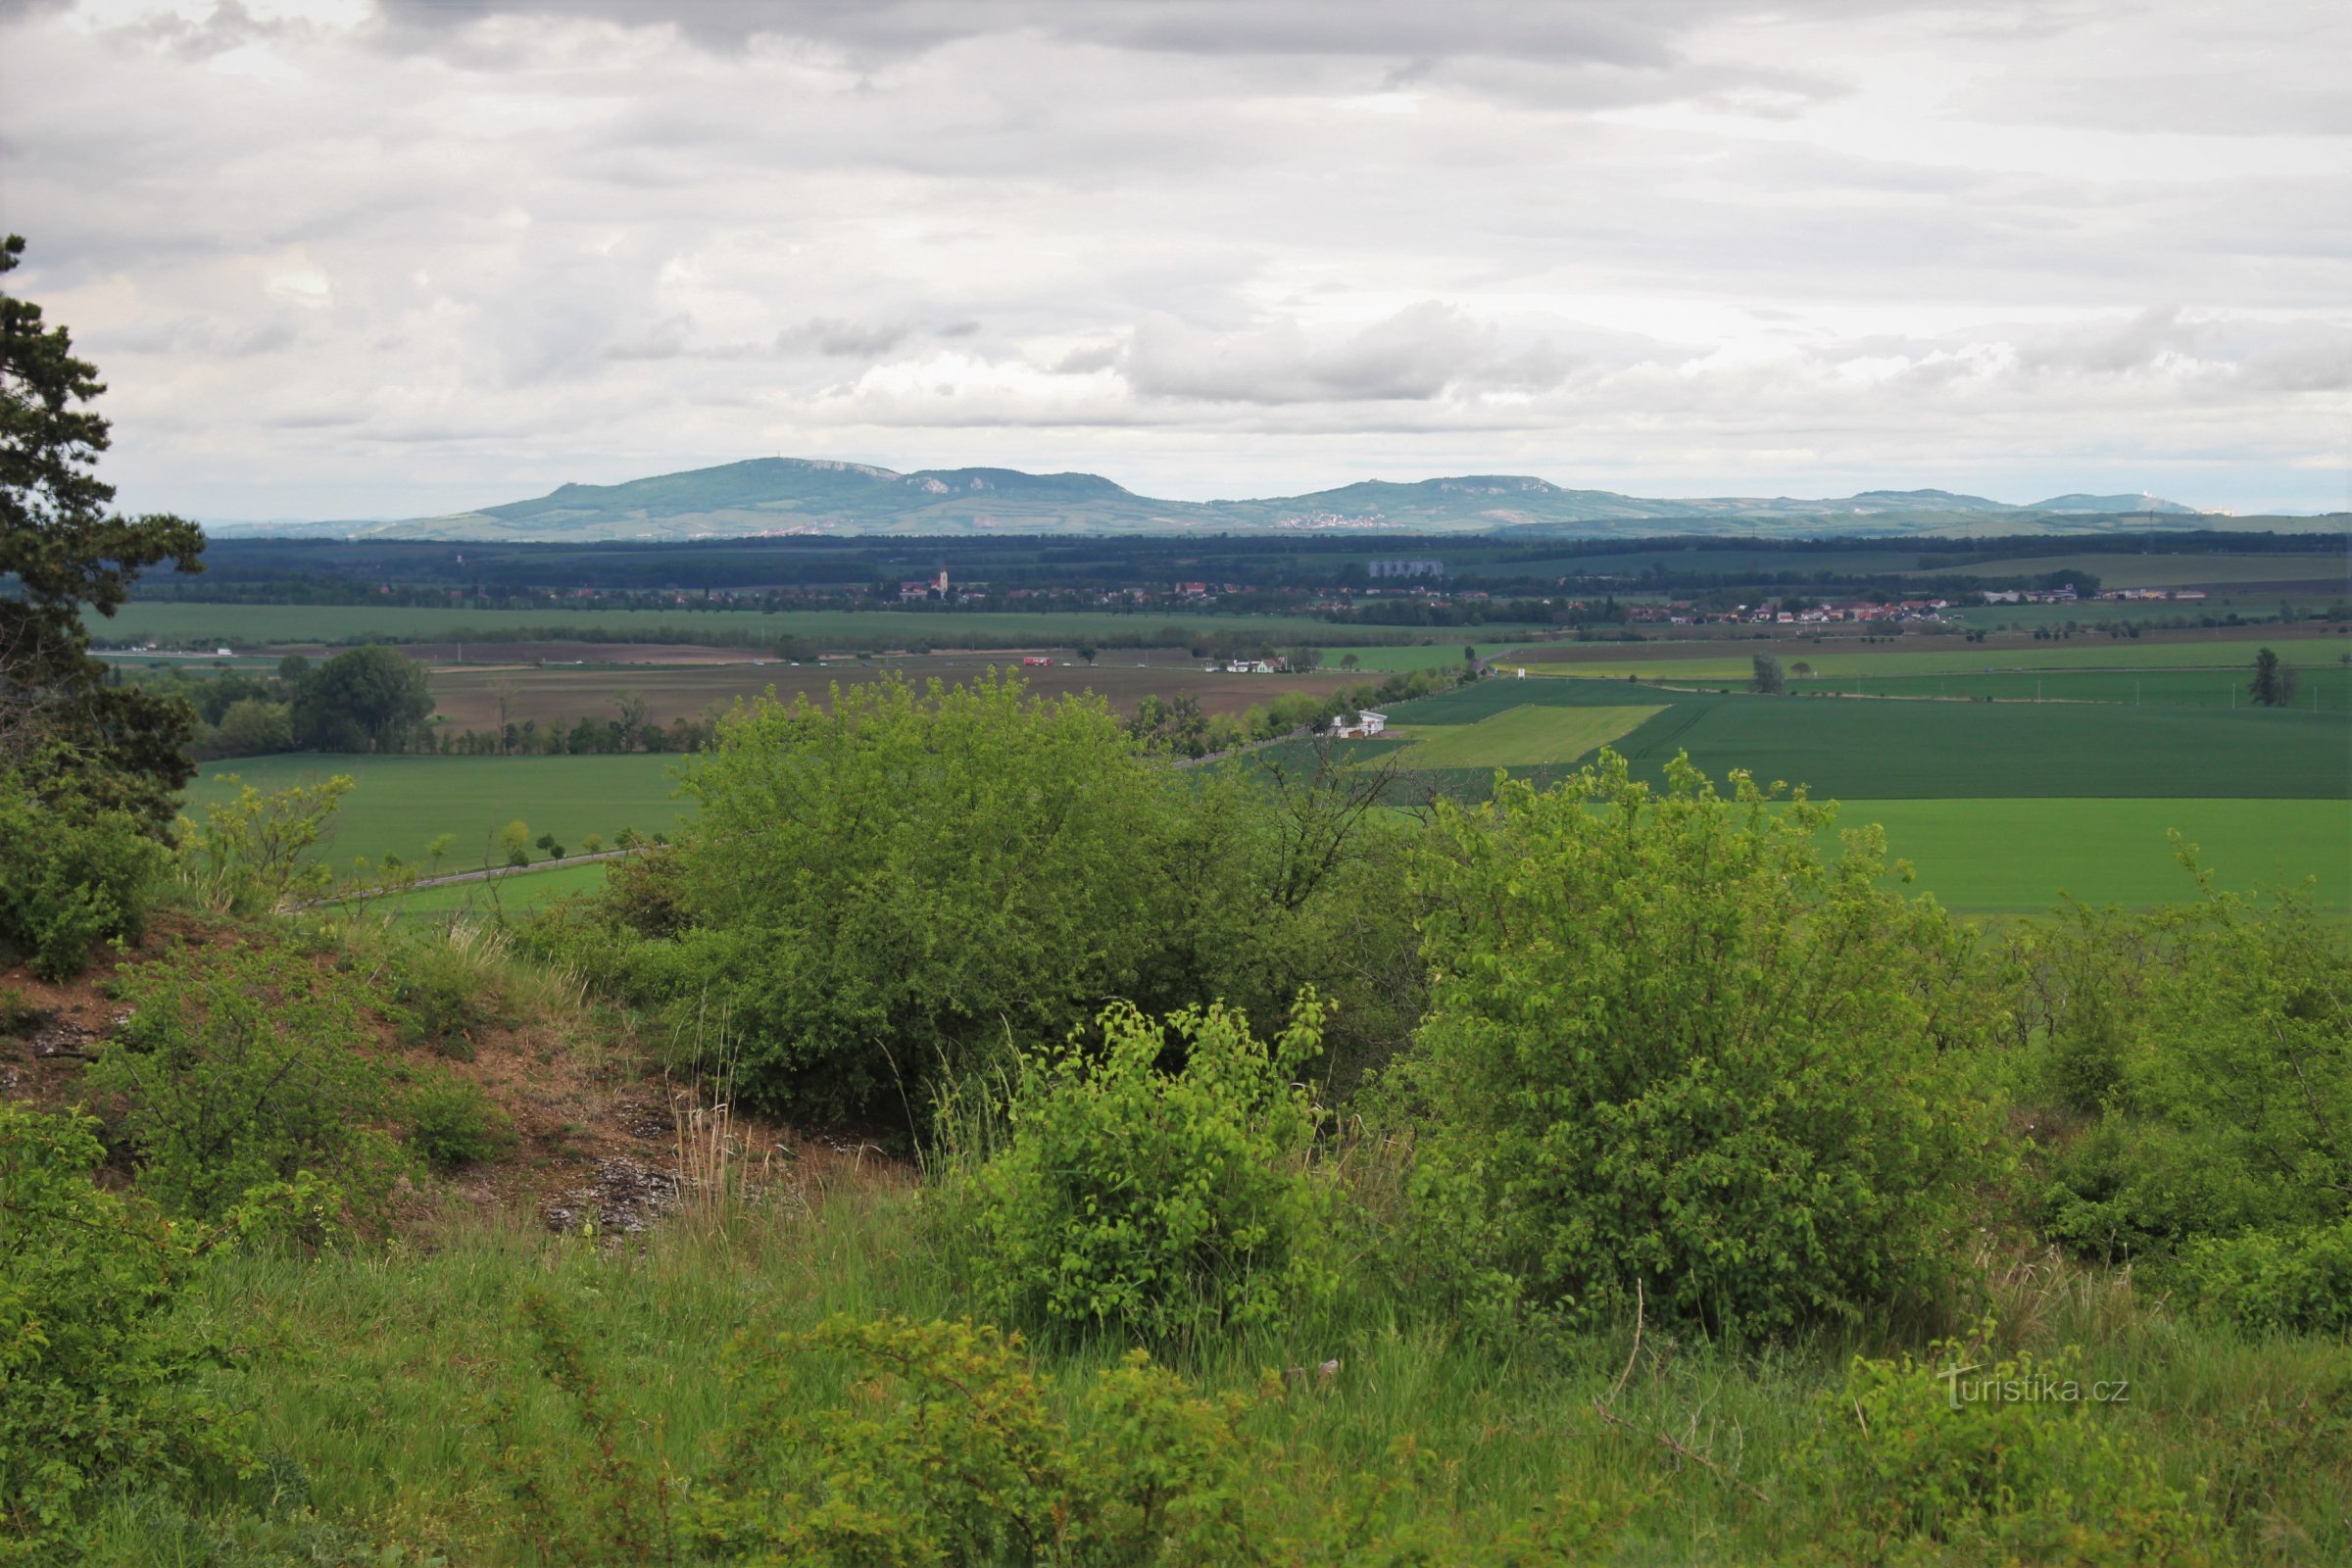 Perhaps the most interesting view is towards the panorama of the Pavlovské vrchy ridge